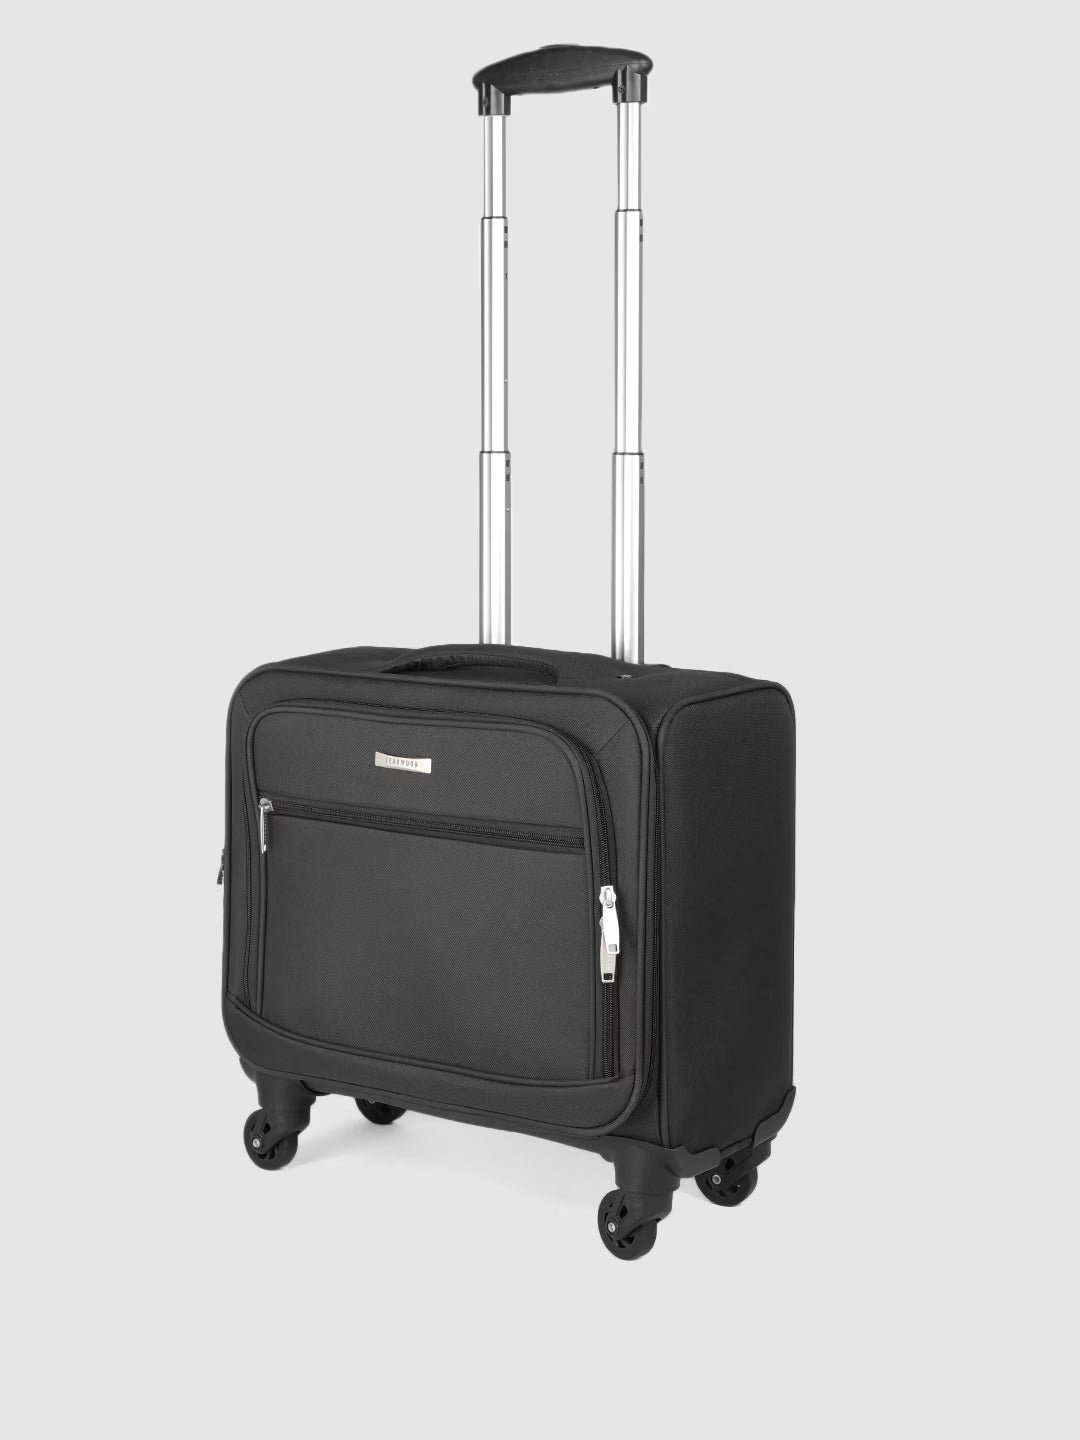 Trail Luggage | Cabin luggage | Laptop Luggage | Quick access pocket